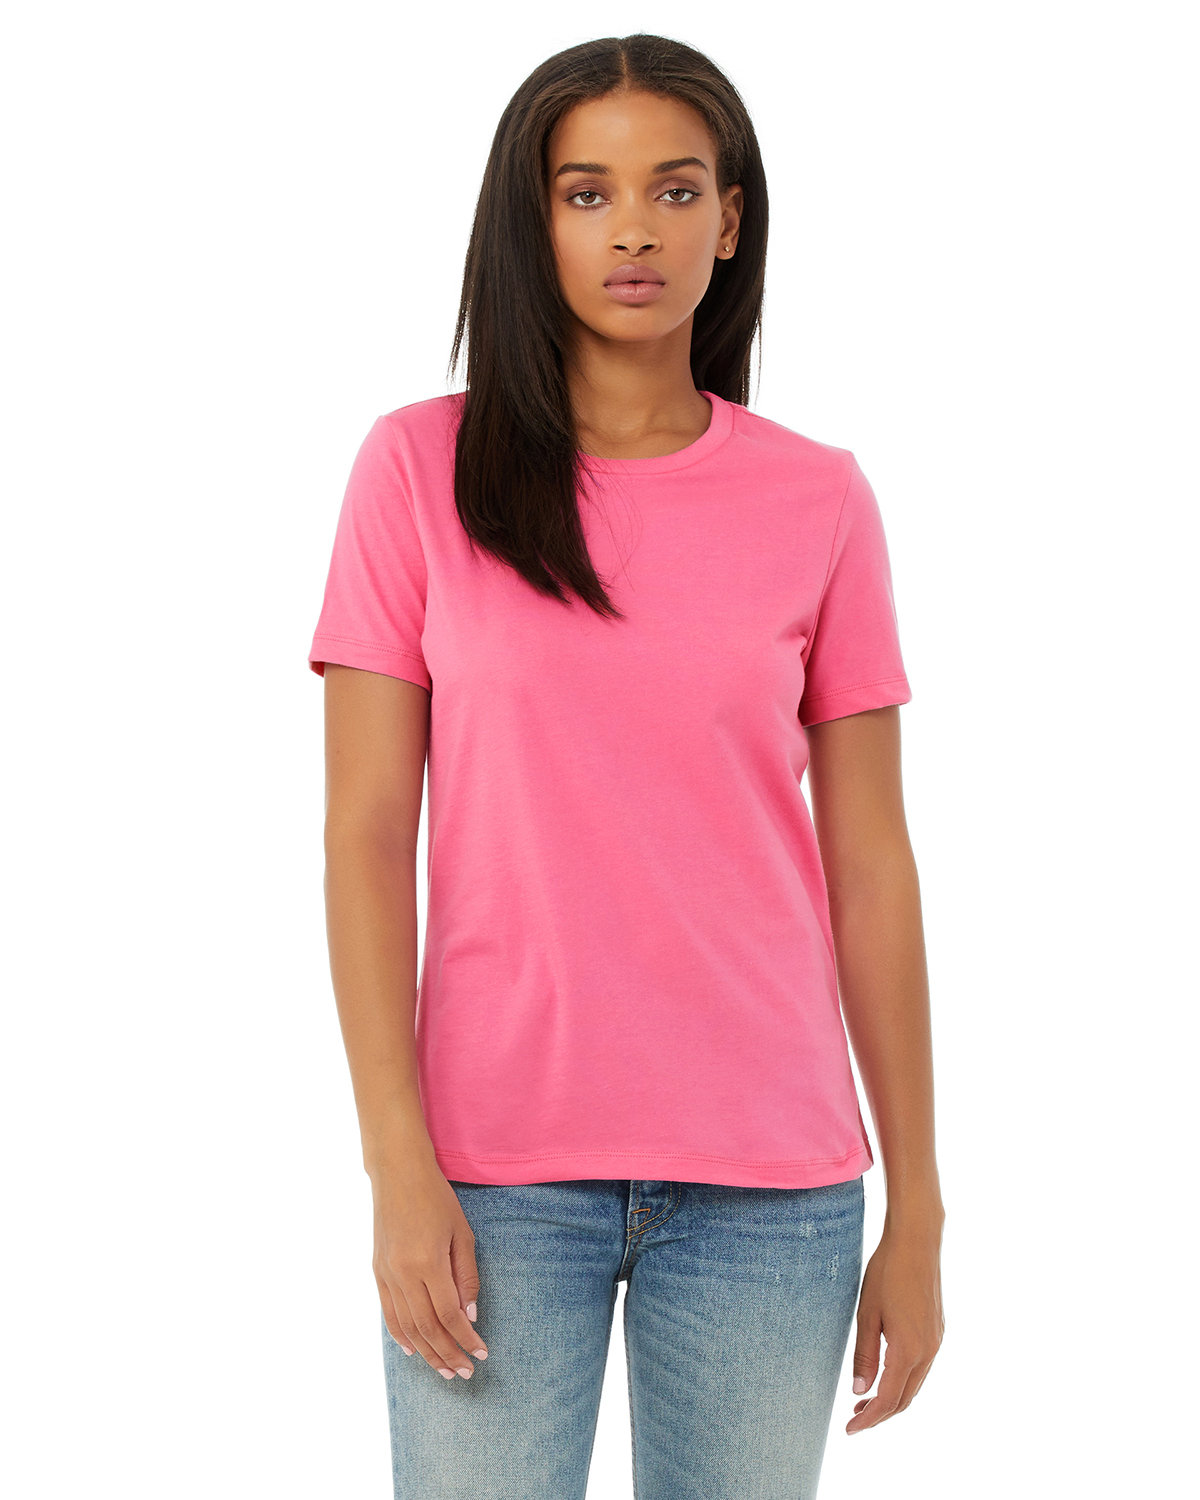 Bella + Canvas Ladies' Relaxed Jersey Short-Sleeve T-Shirt CHARITY PINK 